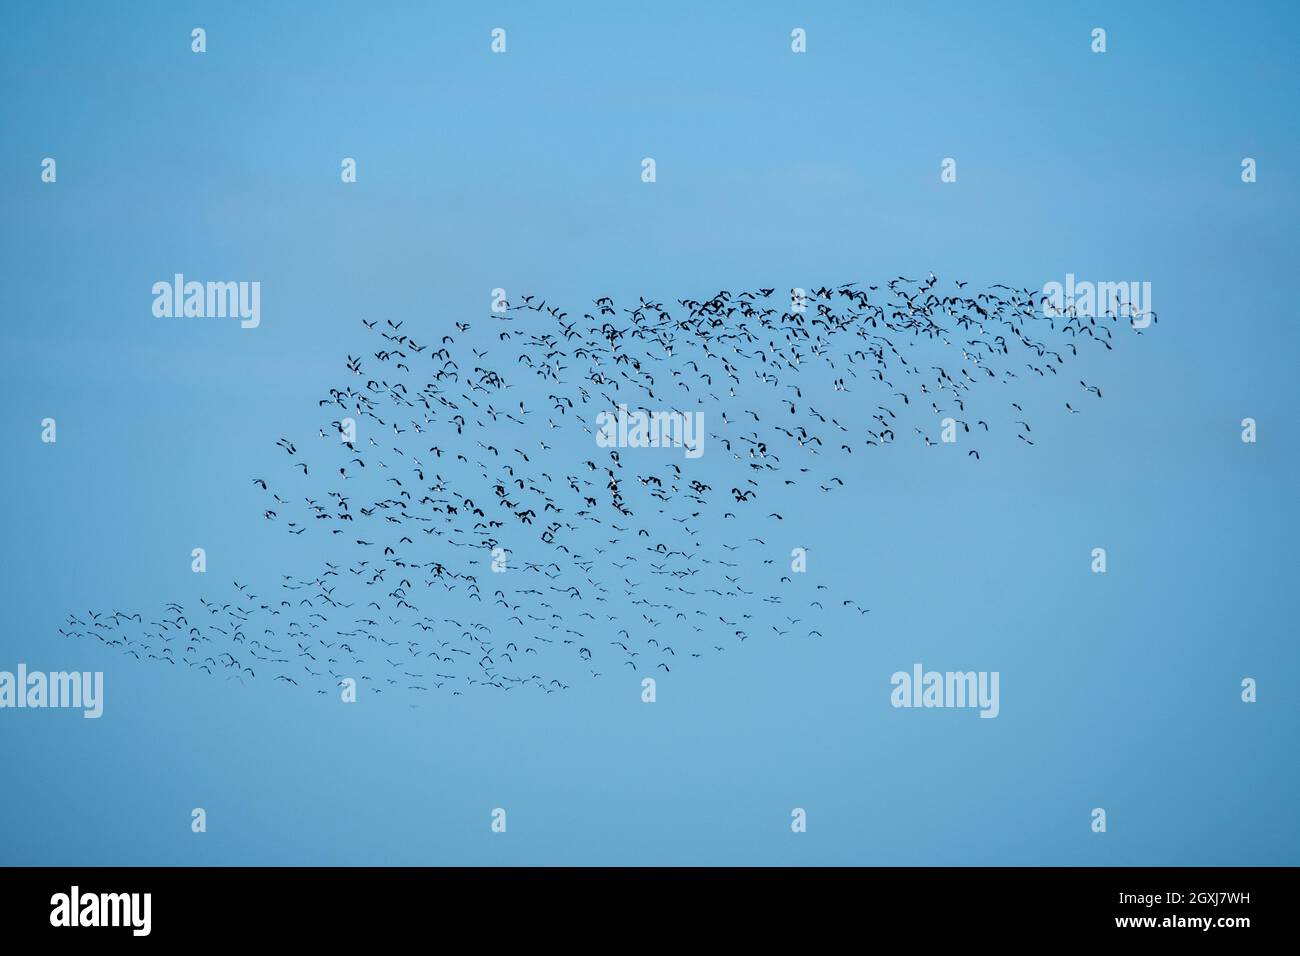 group of birds in the sky Stock Photo